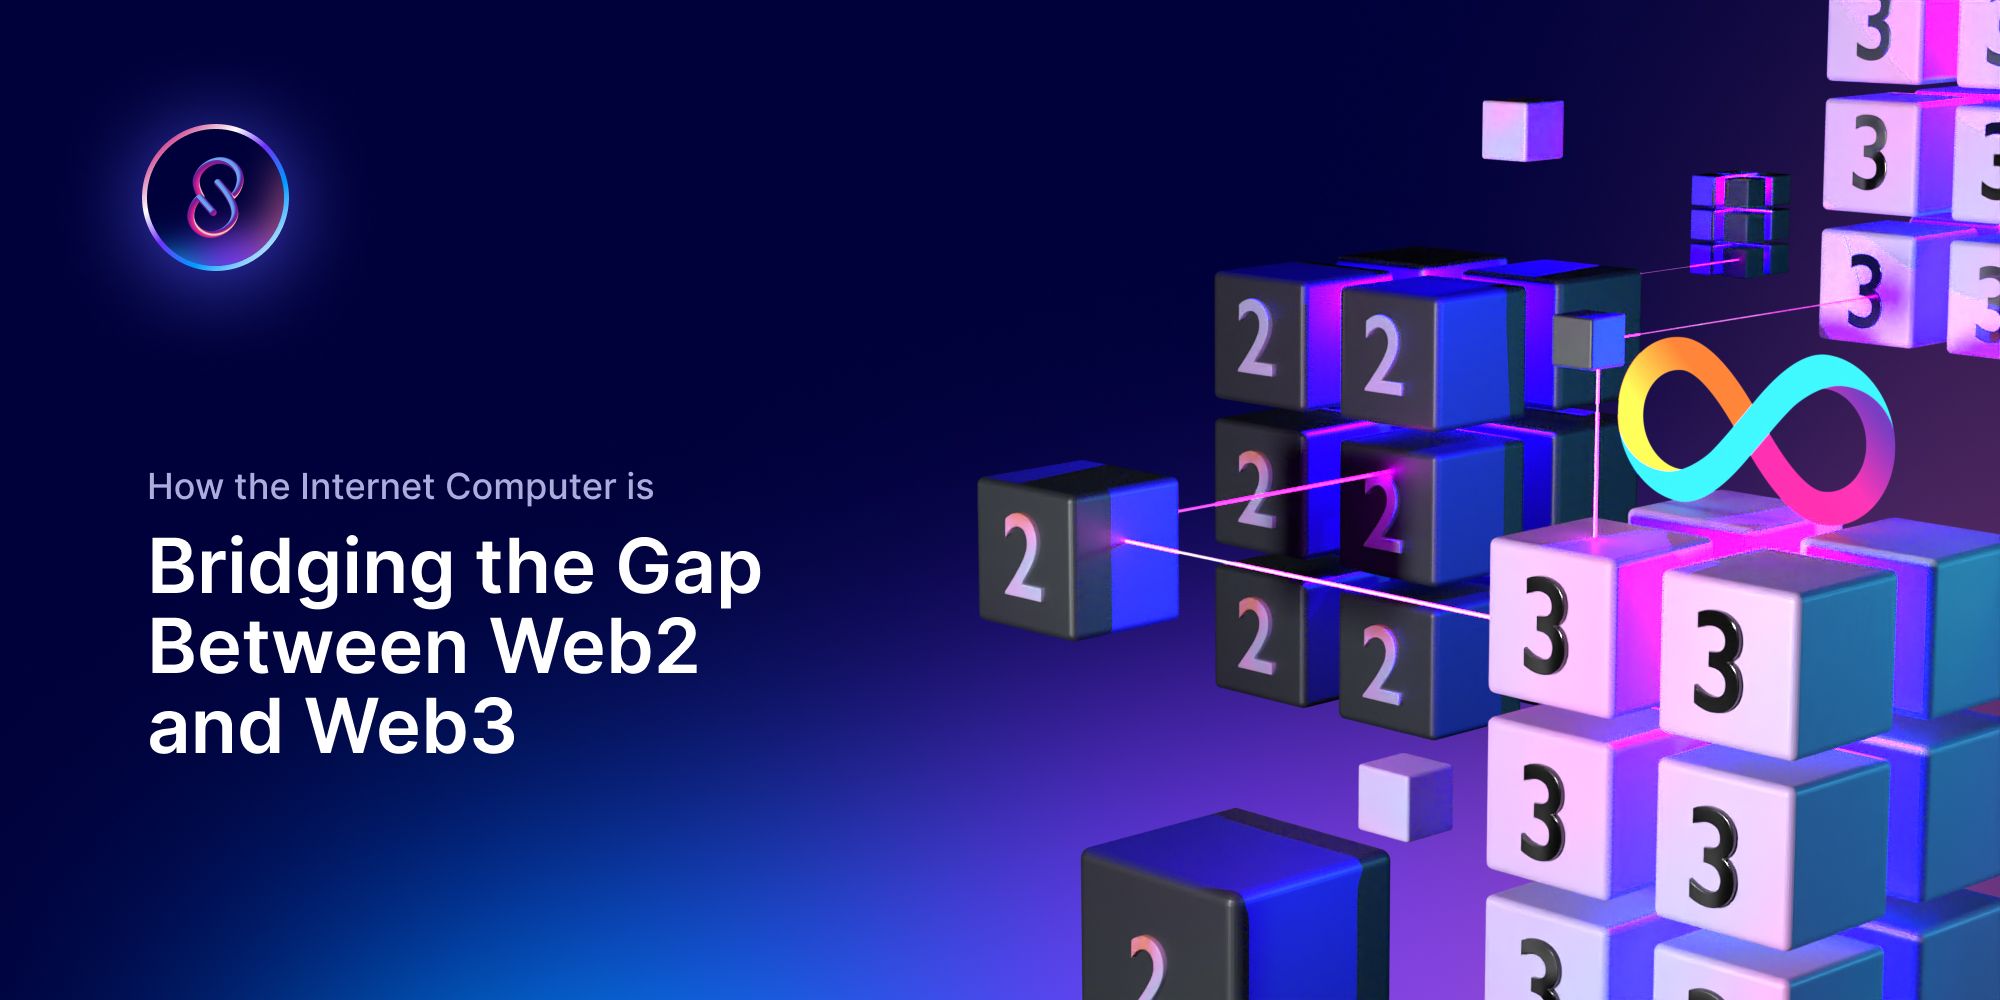 How the Internet Computer is Bridging the Gap Between Web2 and Web3